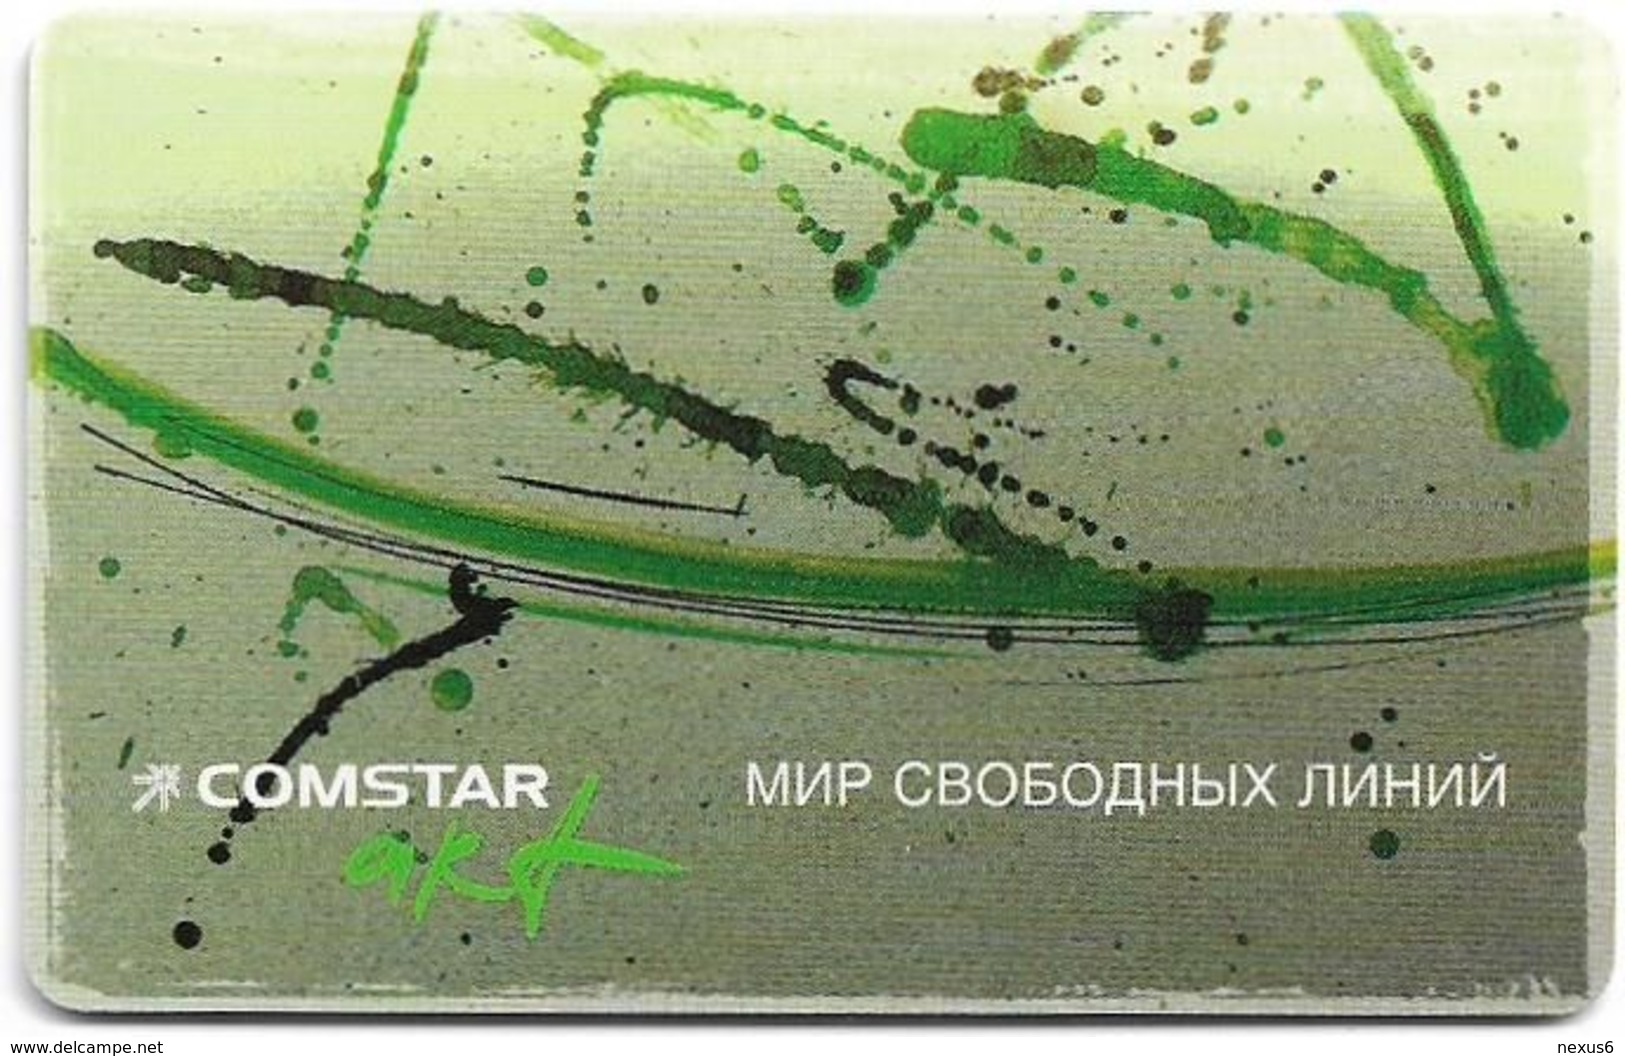 Russia - Comstar (chip) - Green Advertising, Art, 2001, 10$, 10.000ex, Used - Rusia